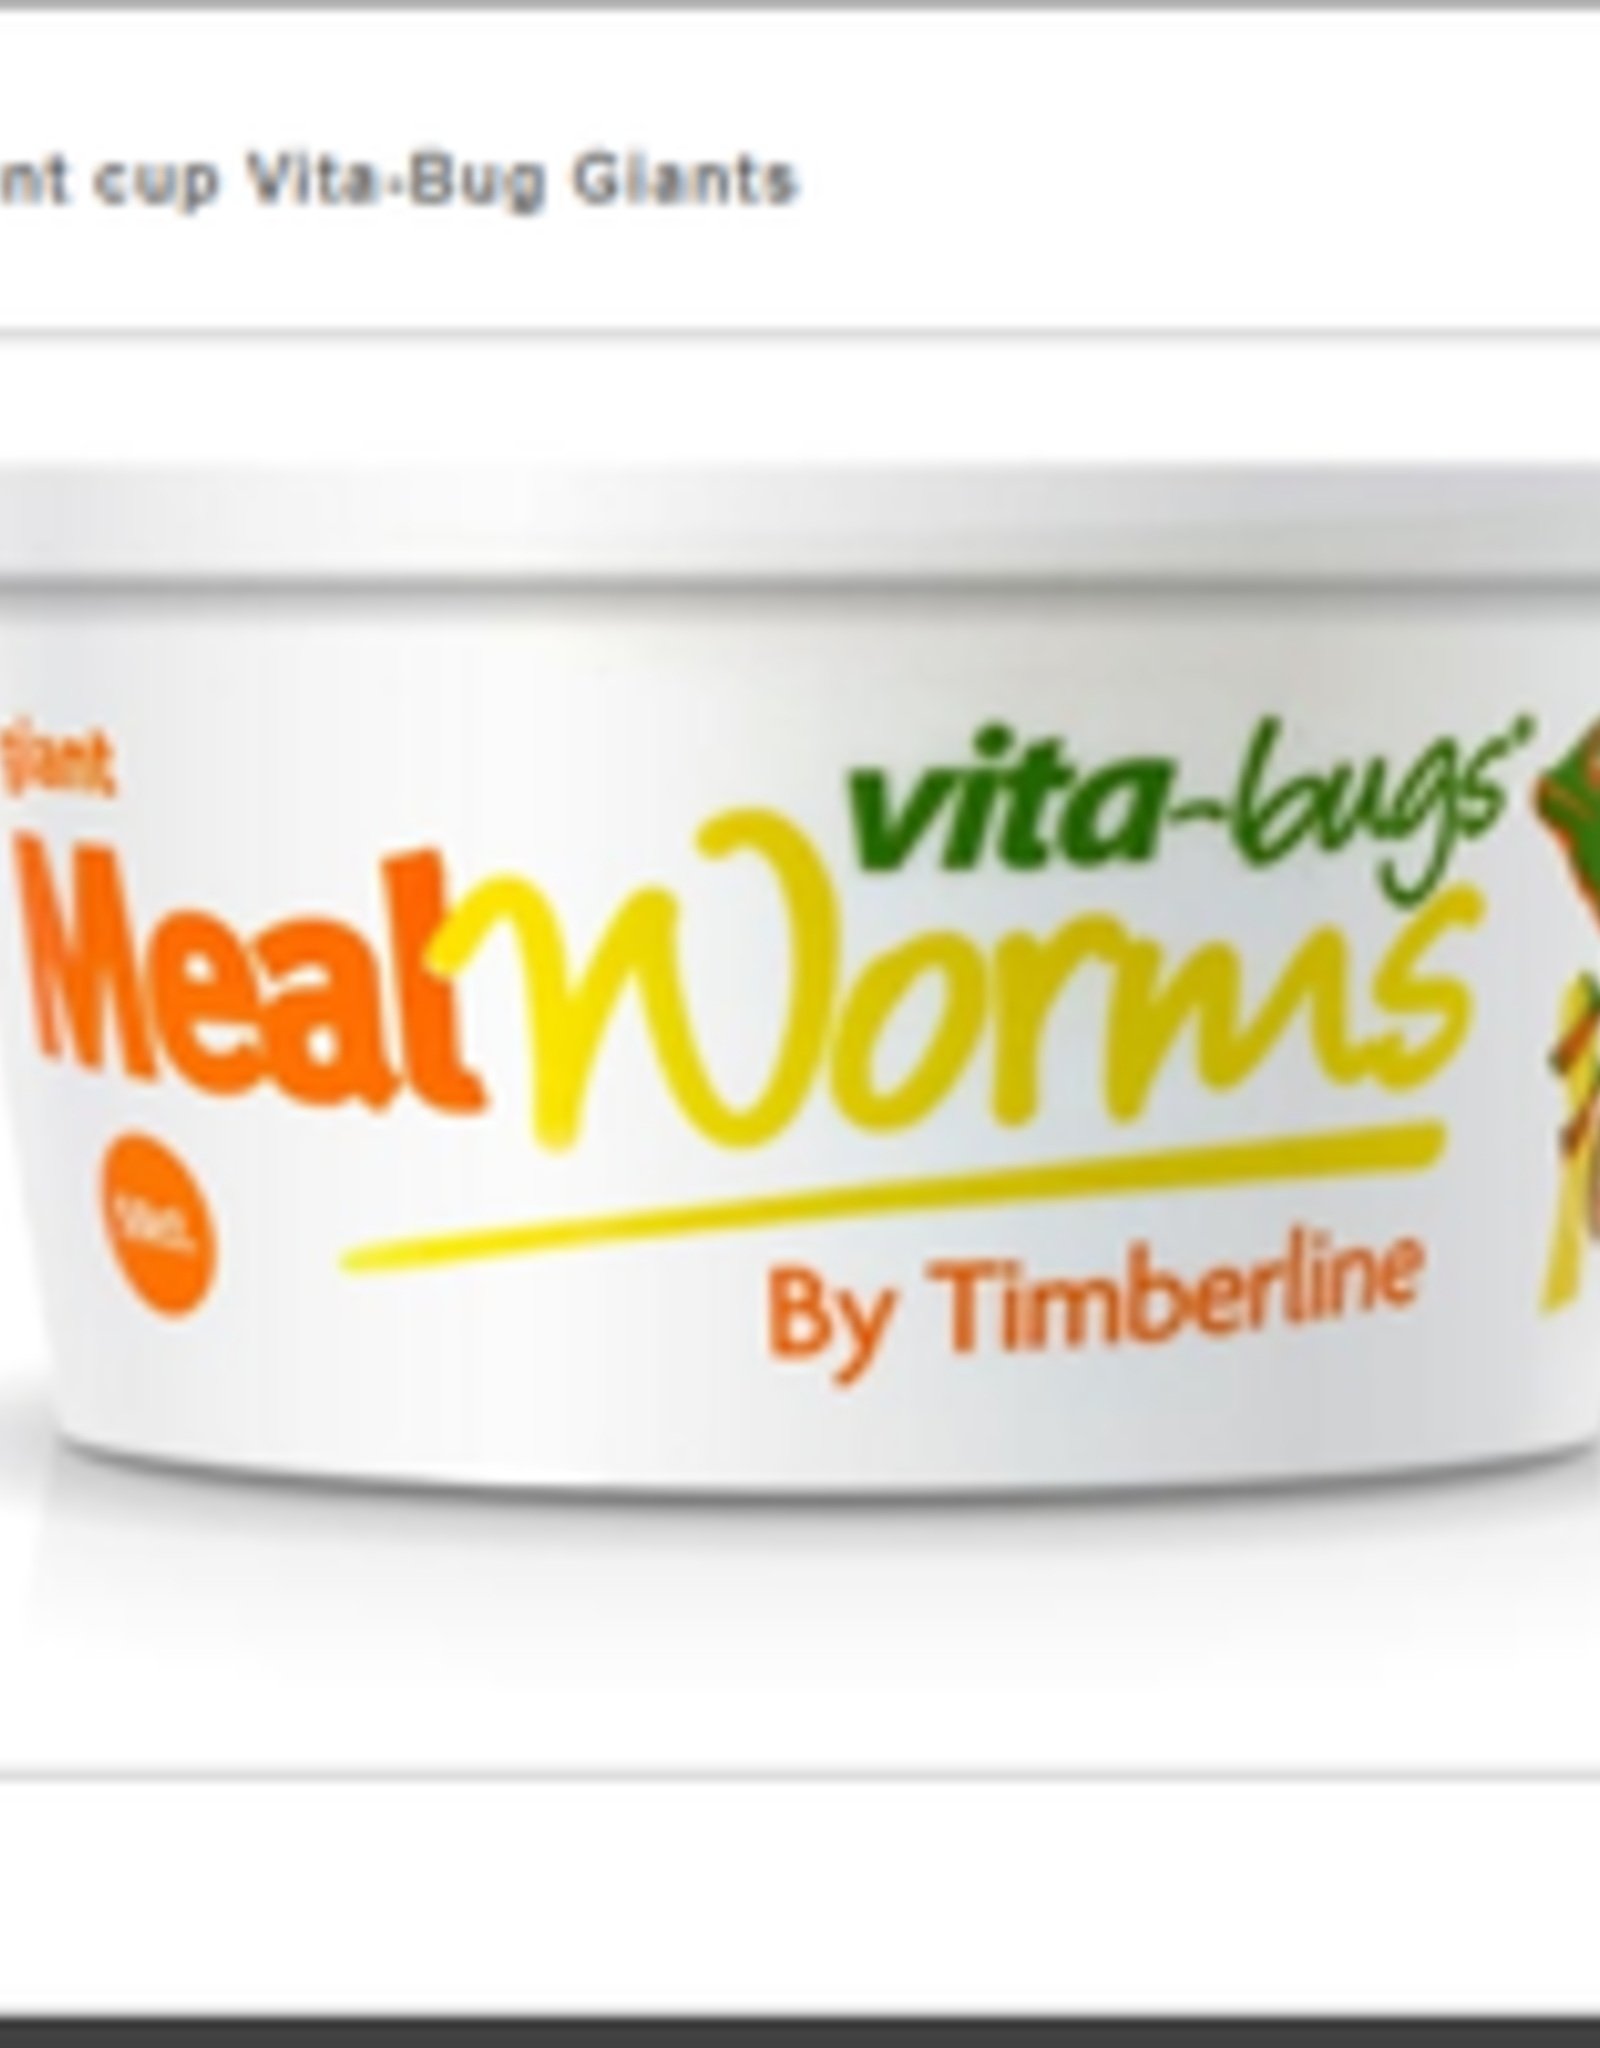 TIMBERLINE LIVE- GIANT MEALWORMS VITA BUGS!- 25 CT